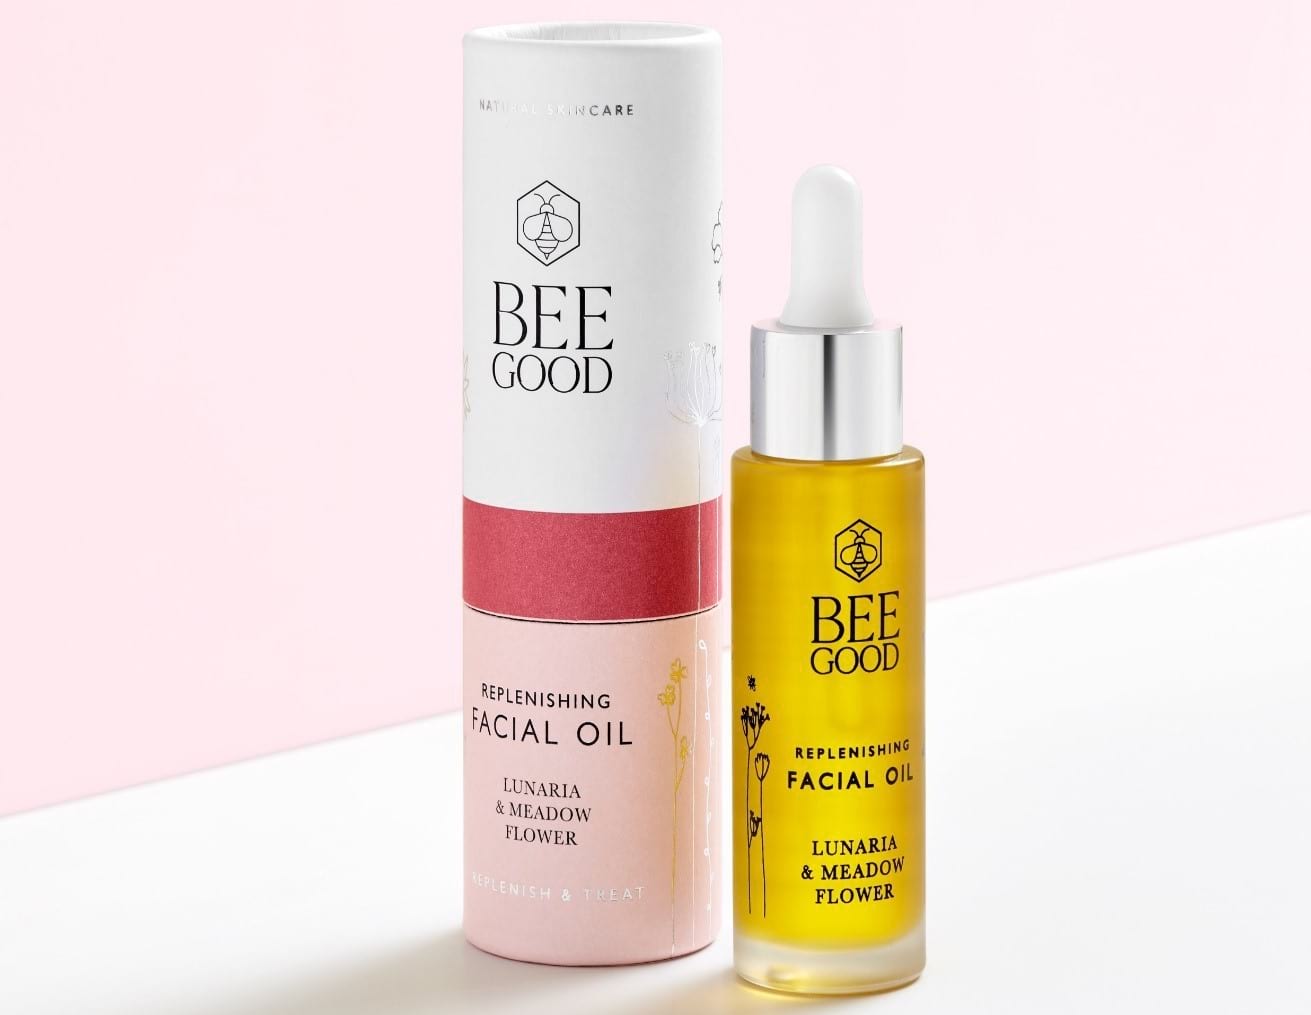 Bee beautiful - 5 ways to embrace the bee trend